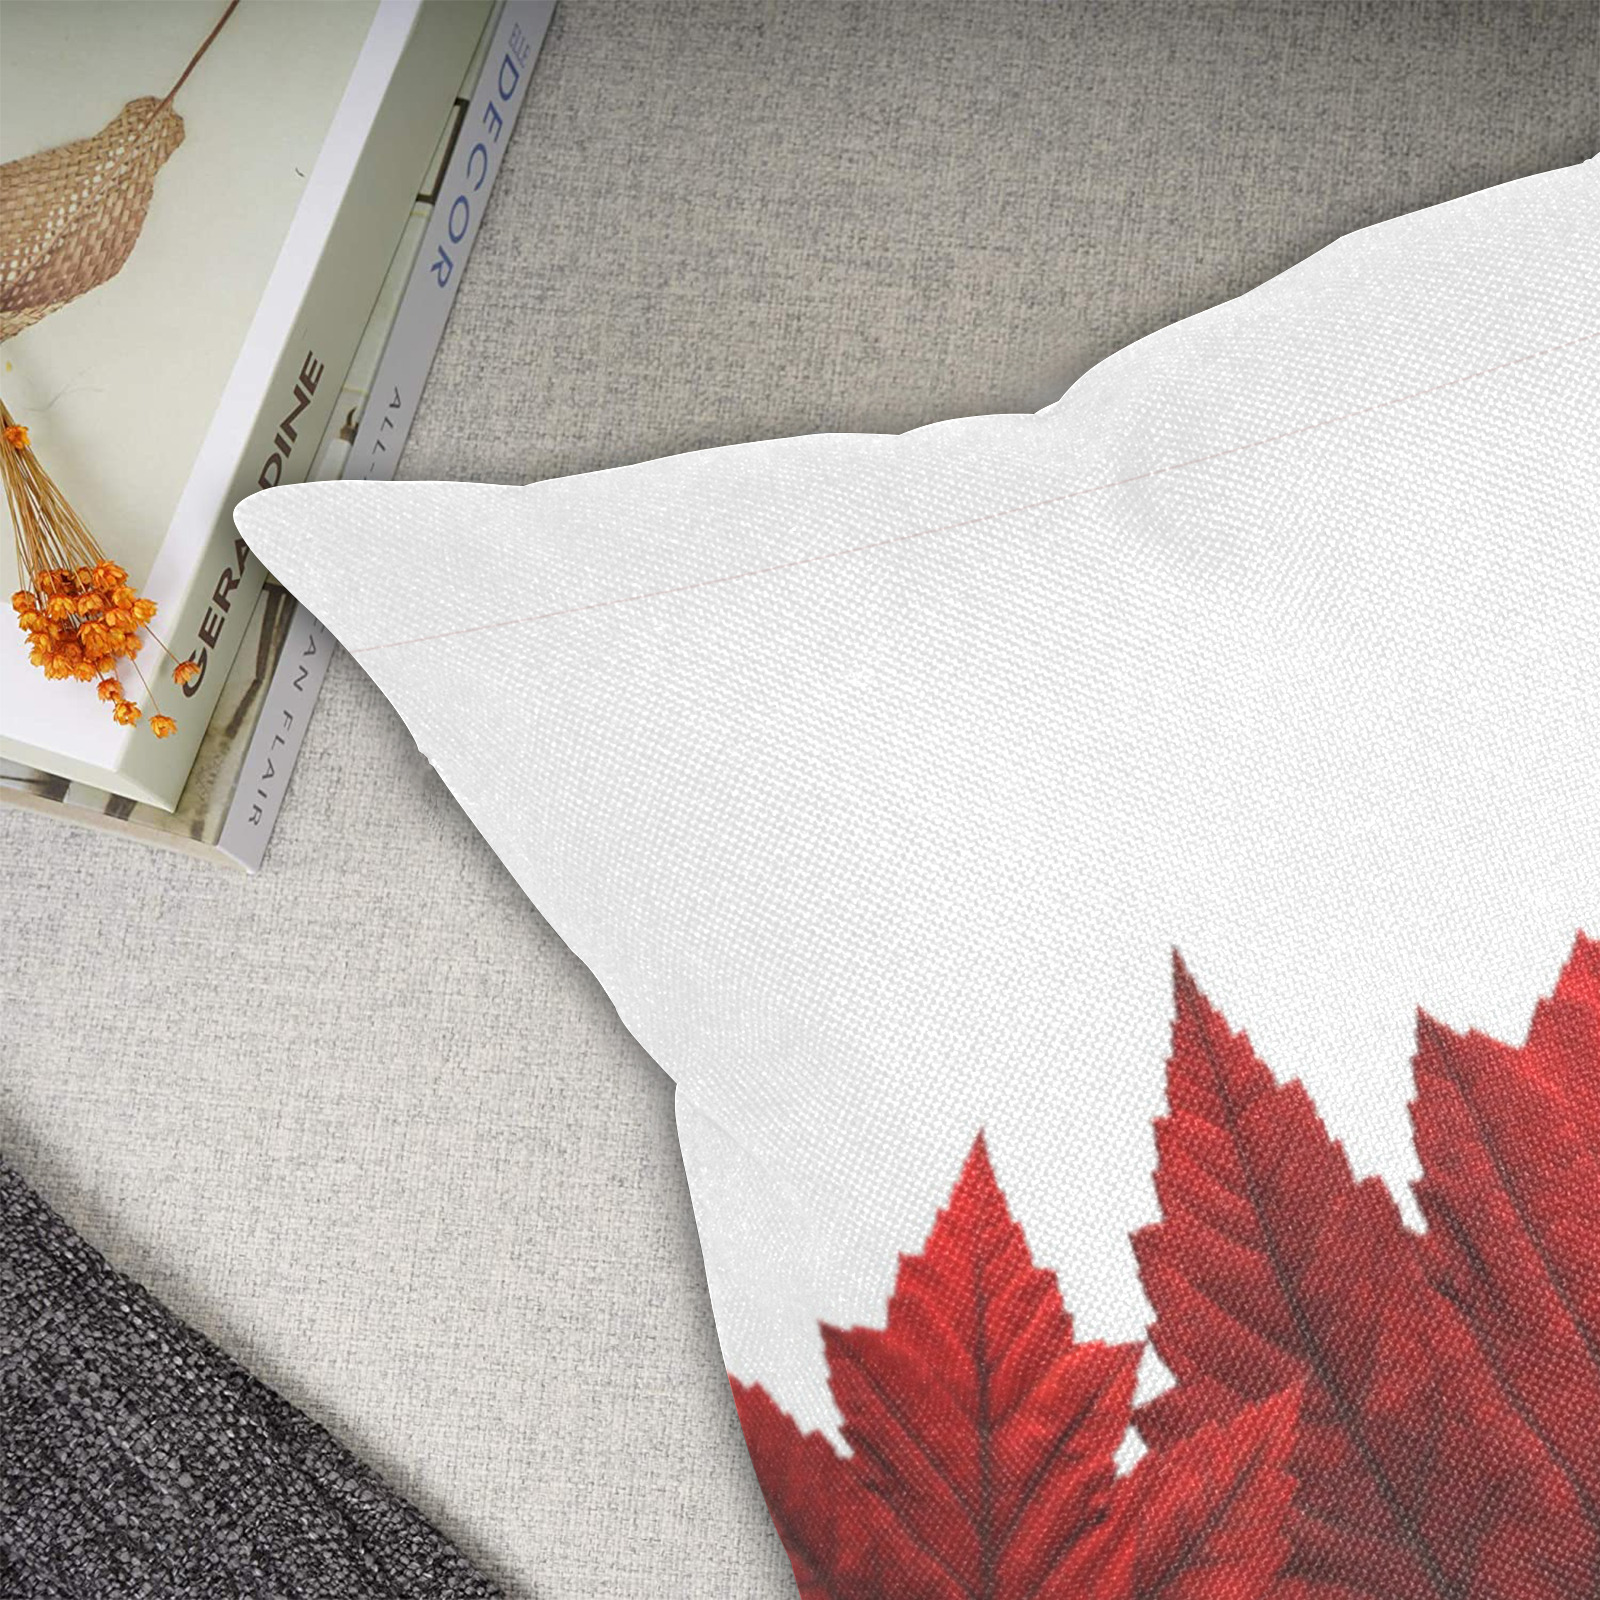 Canada Maple Leaf Linen Zippered Pillowcase 18"x18"(Two Sides)